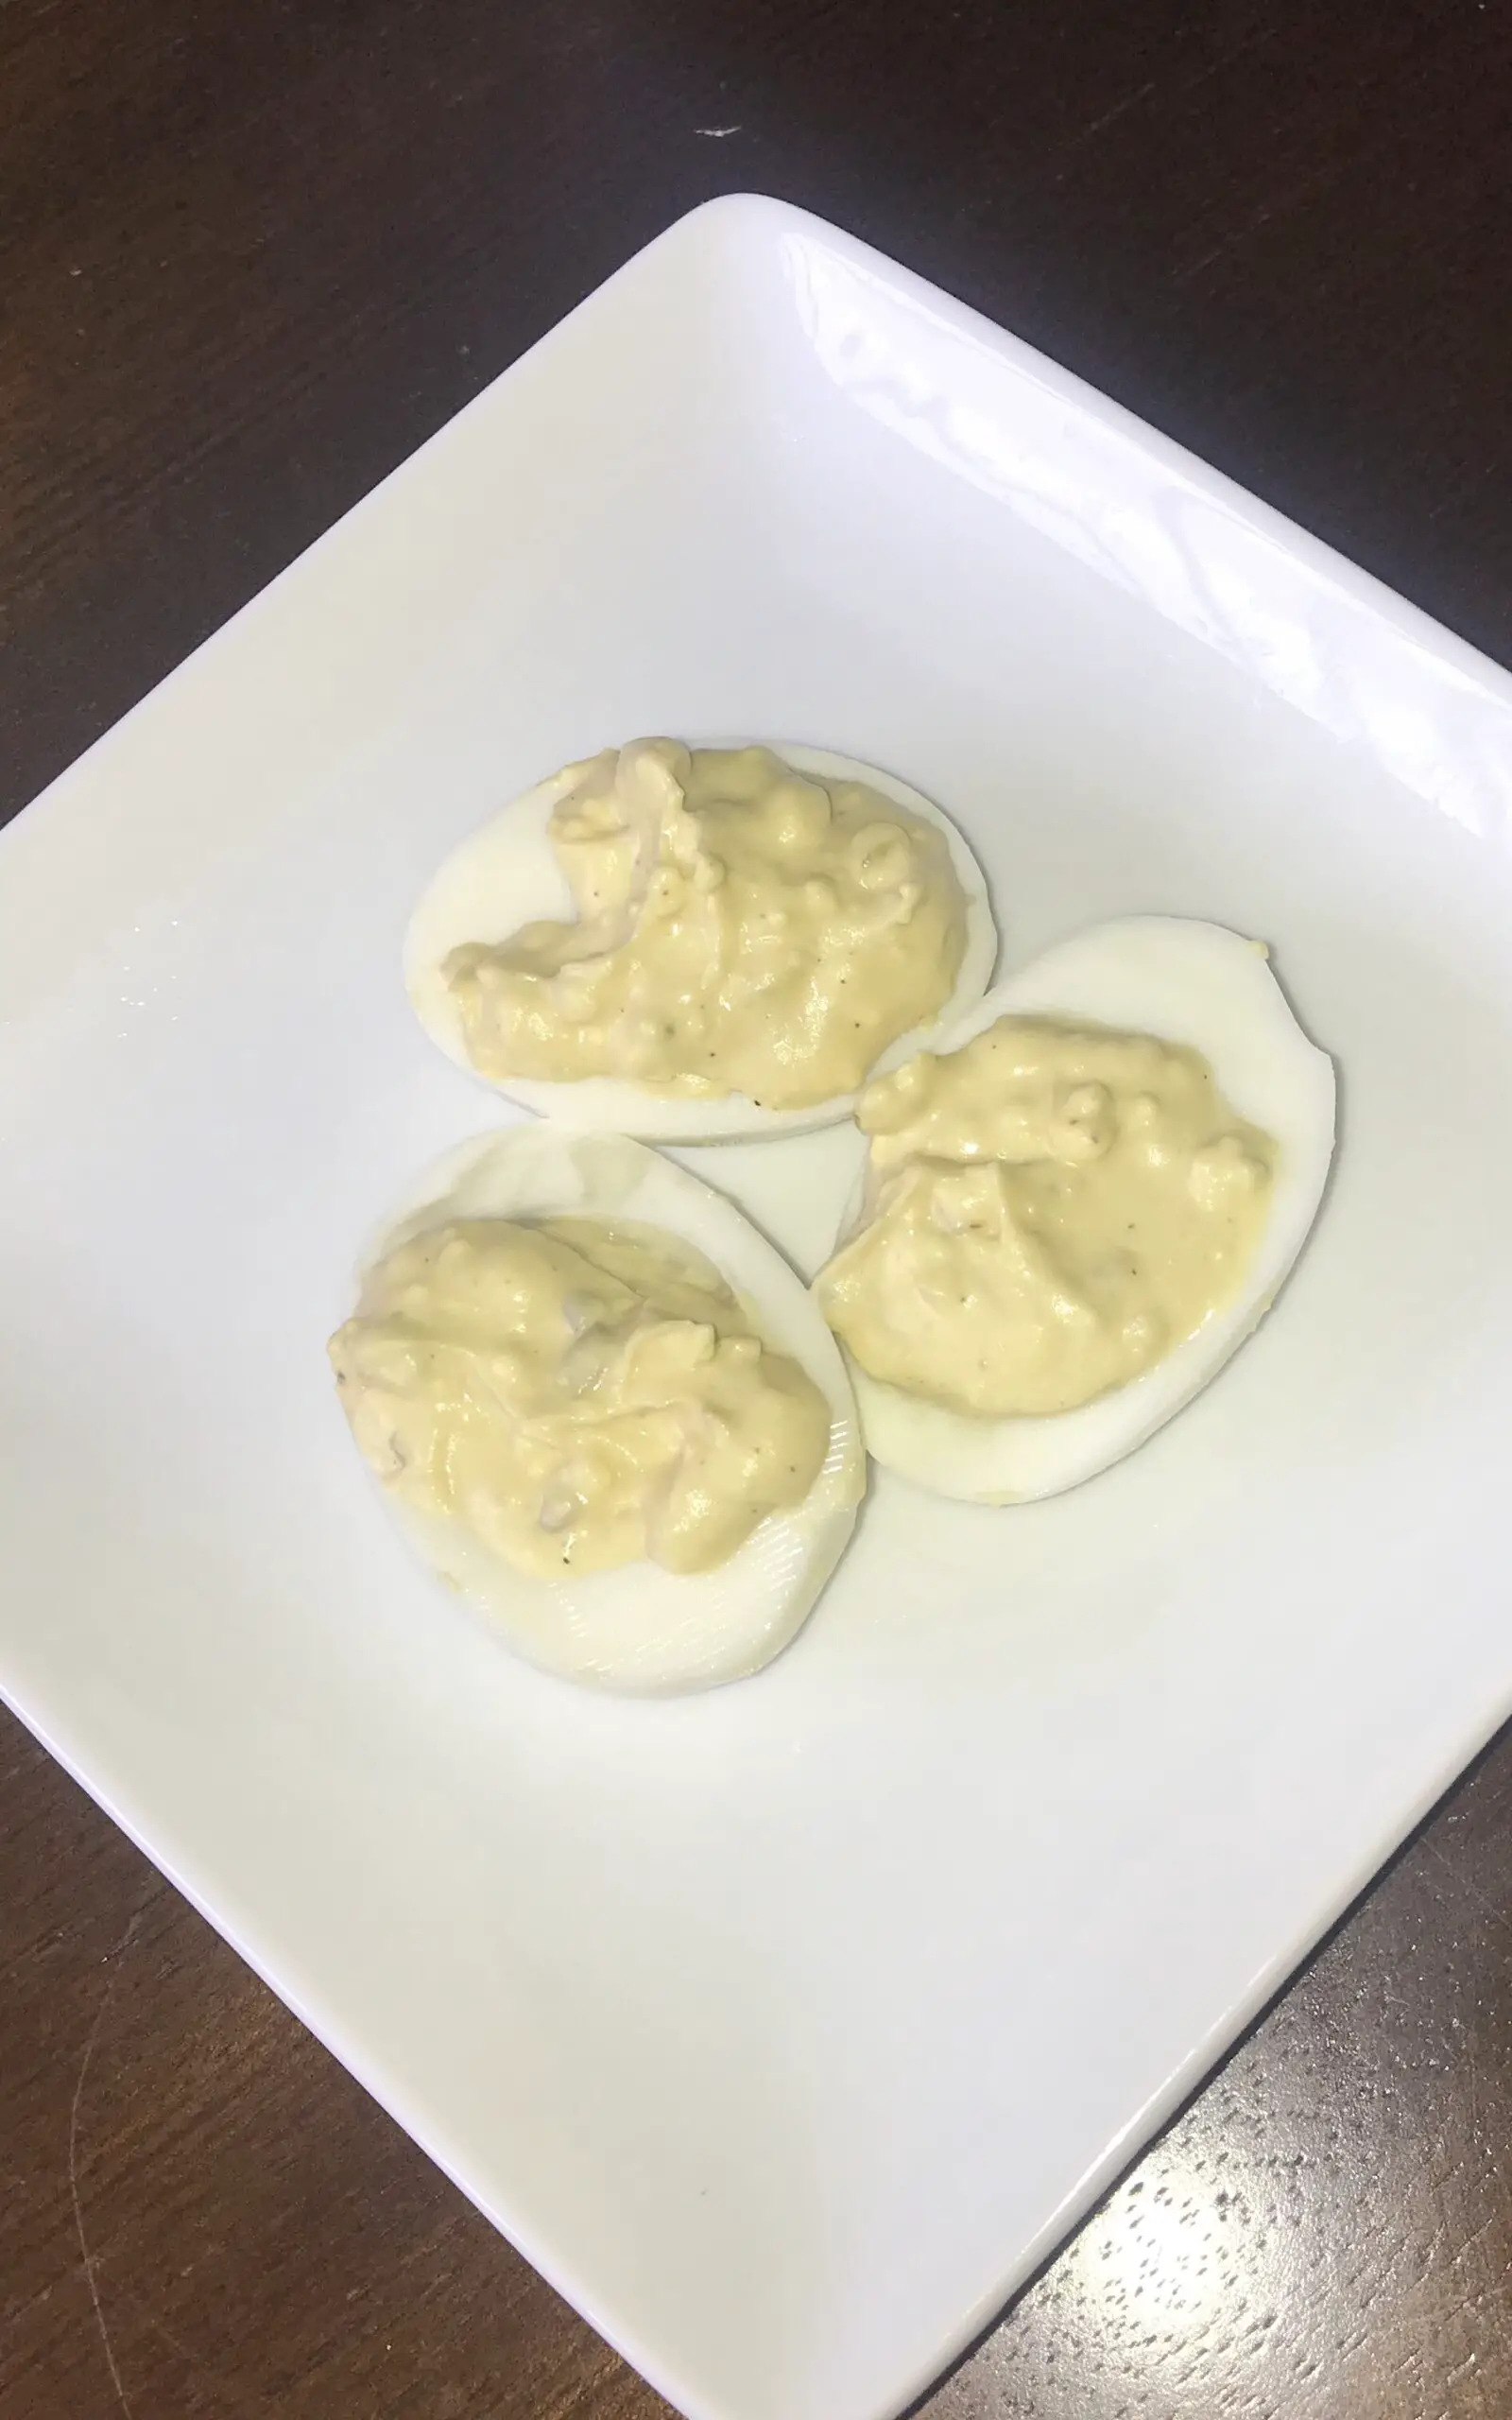 The best ever deviled eggs or stuffed eggs with relish, pepper and some other simple ingredients. It is the most delicious breakfast or snack.